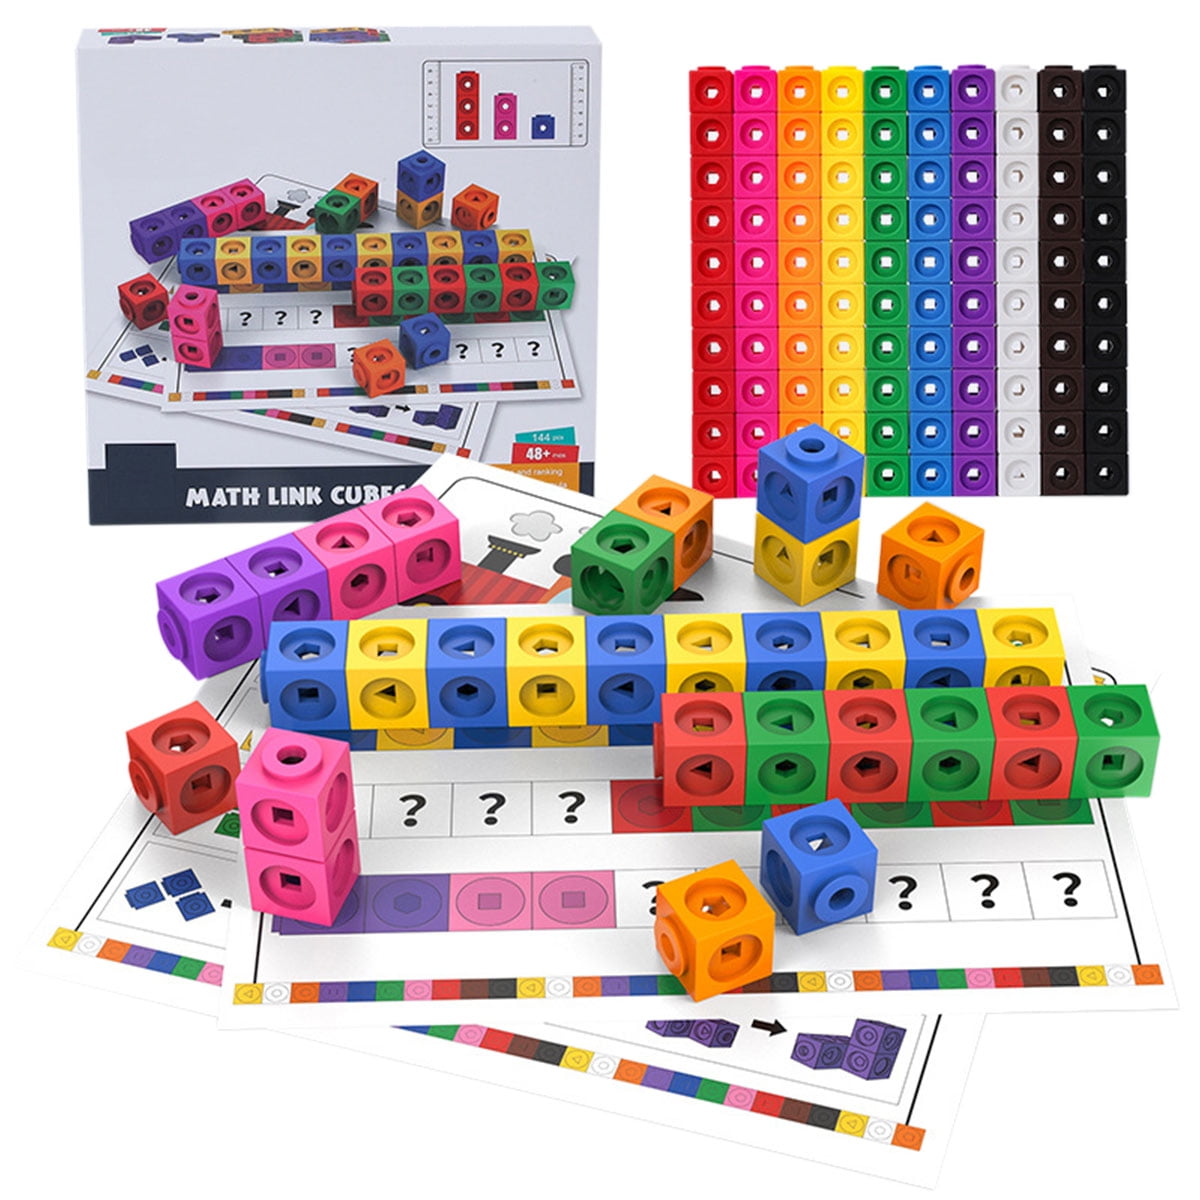 Kid's Learning Early Math Link Cube Preschool Counting Sorting Game Activity 